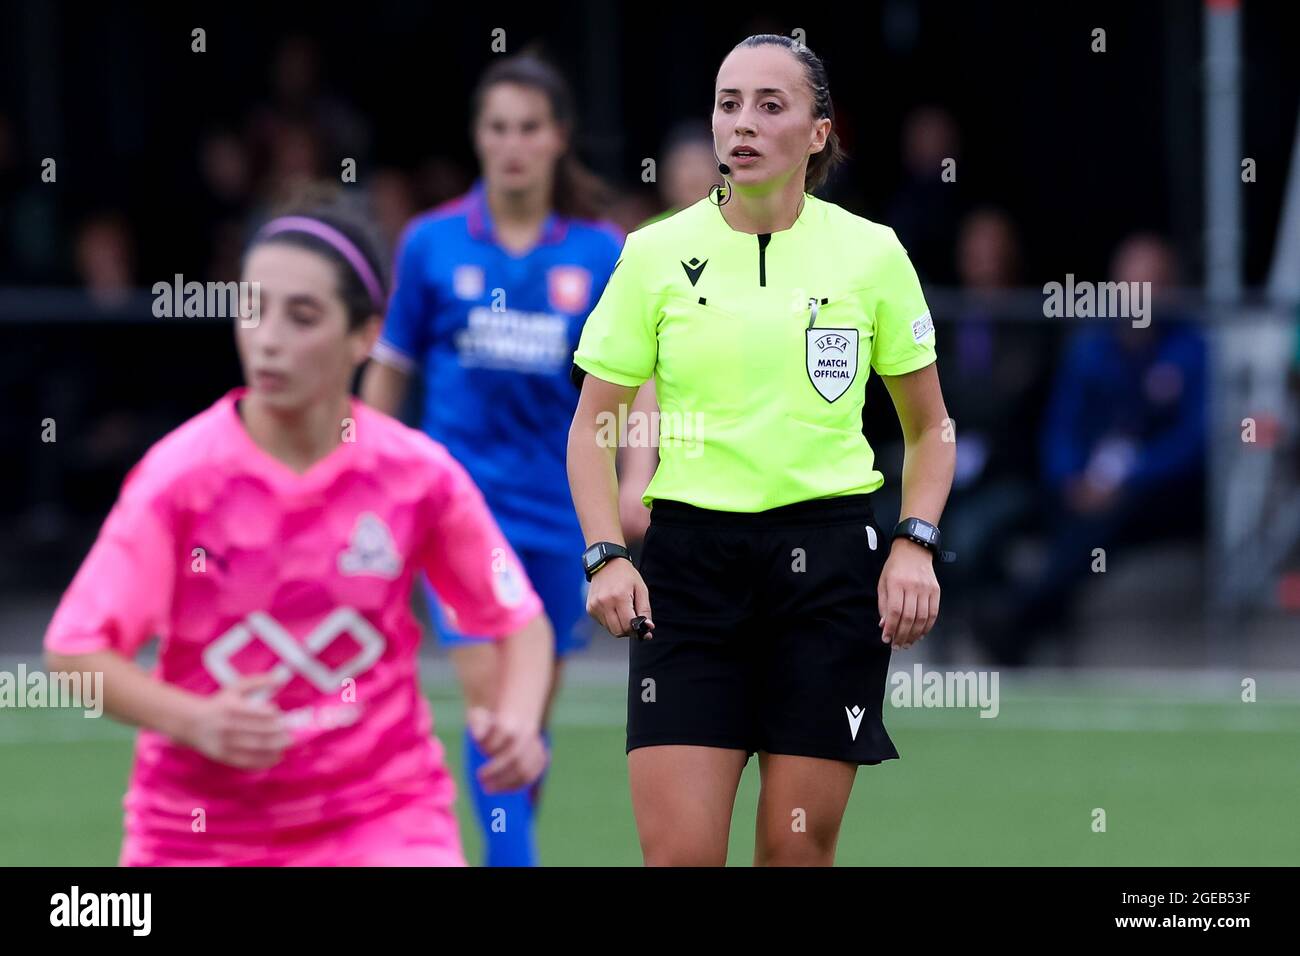 ENSCHEDE, NETHERLANDS - AUGUST 18: Referee Cansu Tiryaki during the UEFA  Women's Champions League First Qualifying Round match between FC Twente and  FC Nike at Sportclub Enschede on August 18, 2021 in